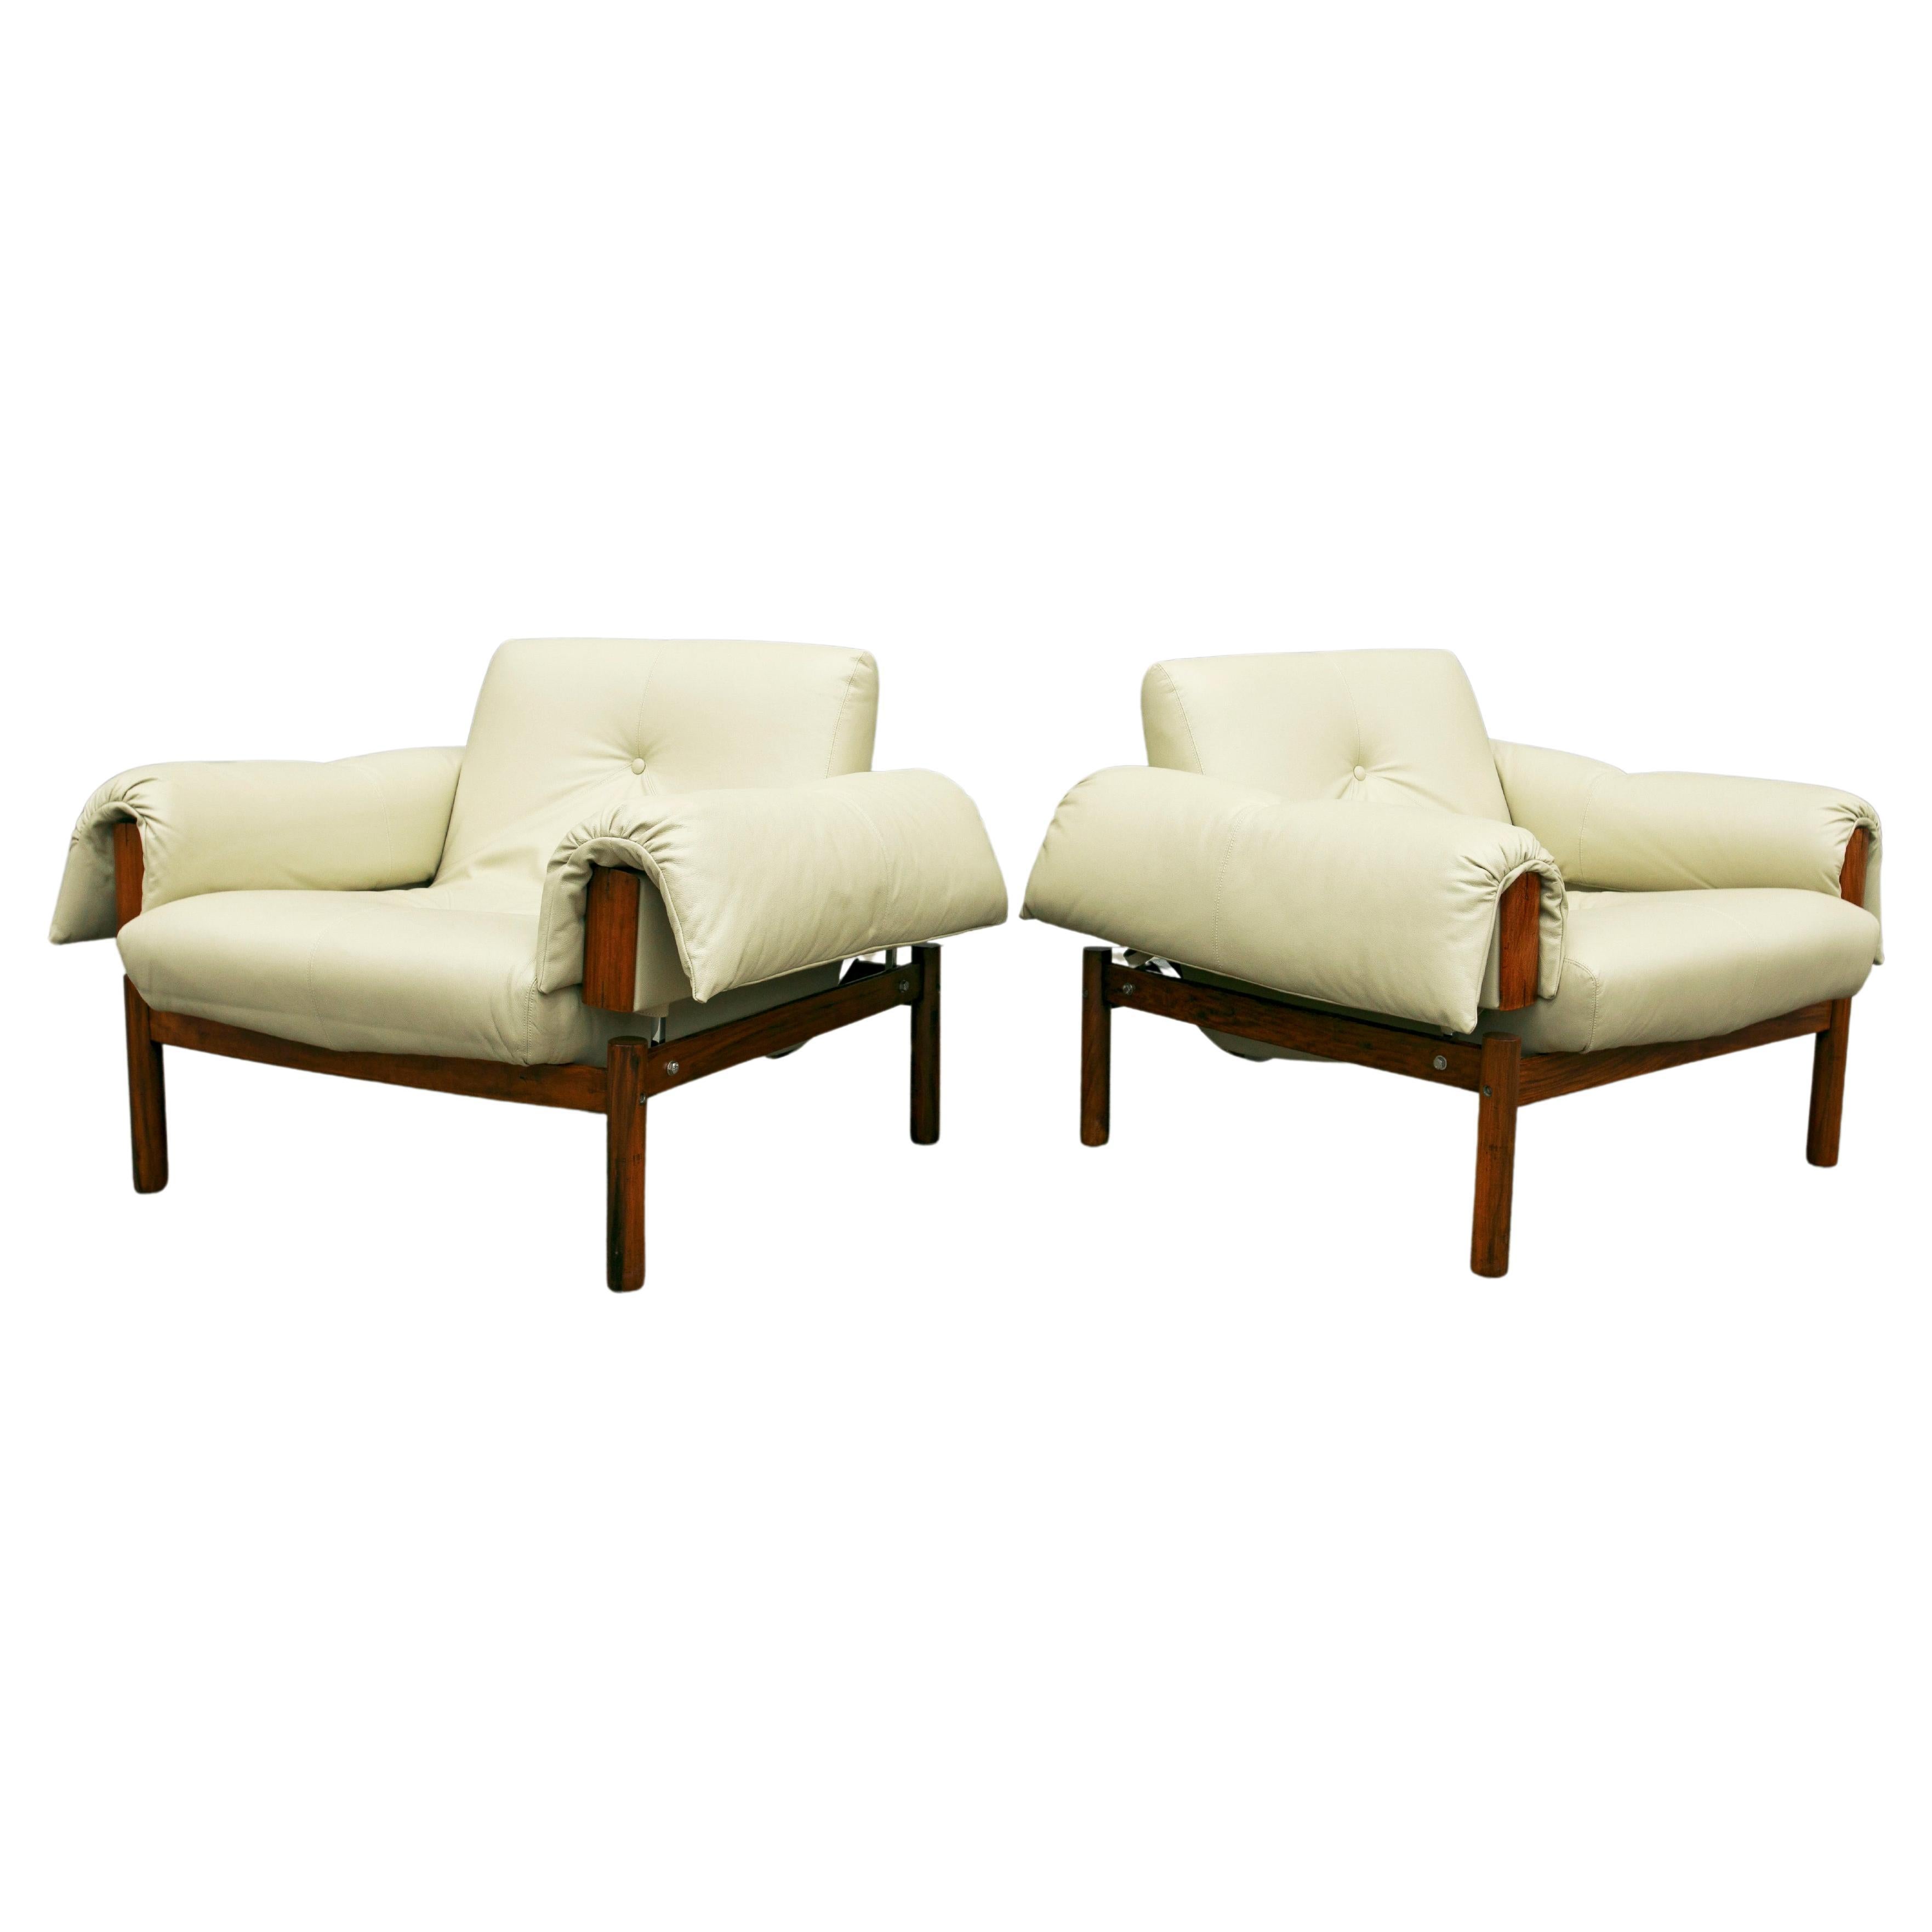 Midcentury Armchairs MP-13 by Percival Lafer in Hardwood & Beige Leather, Brazil For Sale